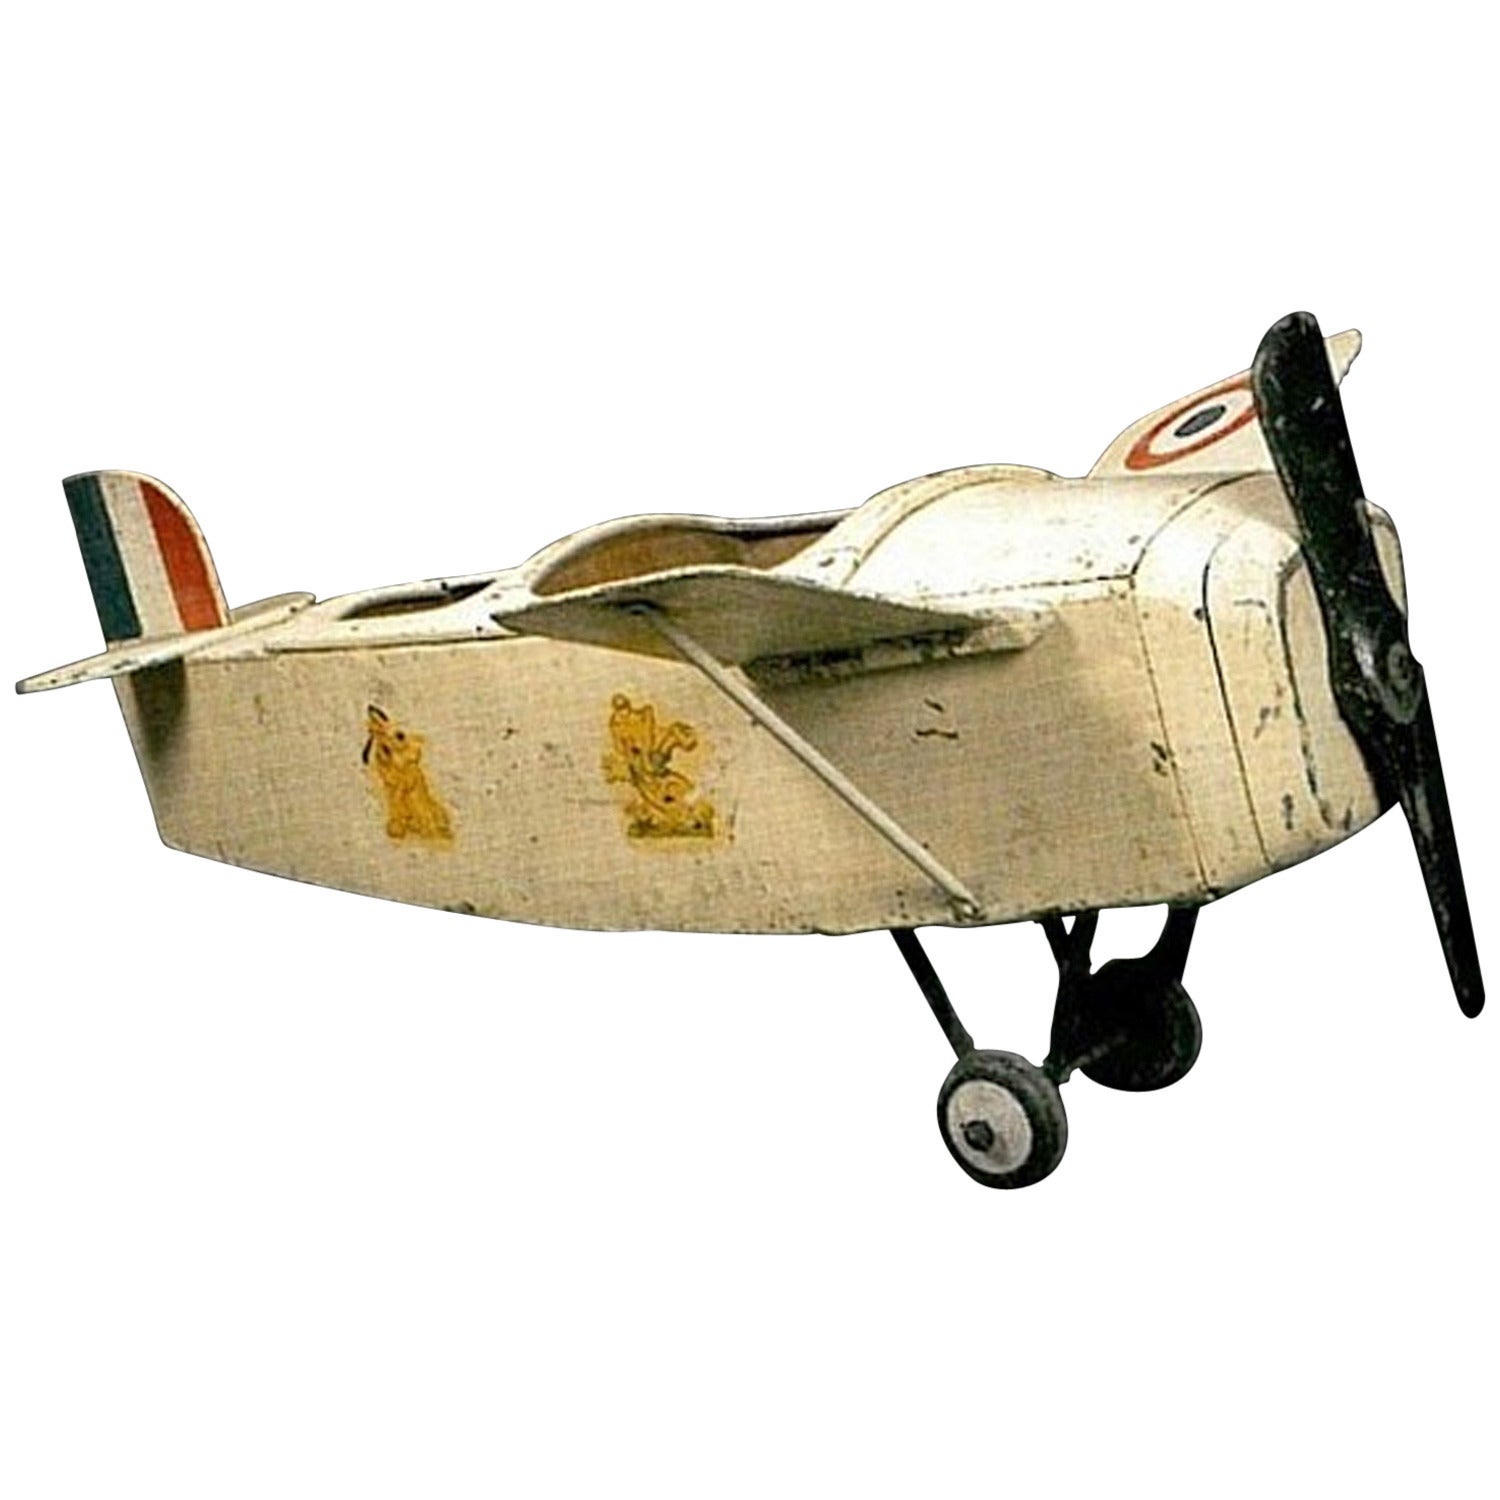 Two-Seat Aircraft Collector's Item Forain Art Exceptional Piece For Sale